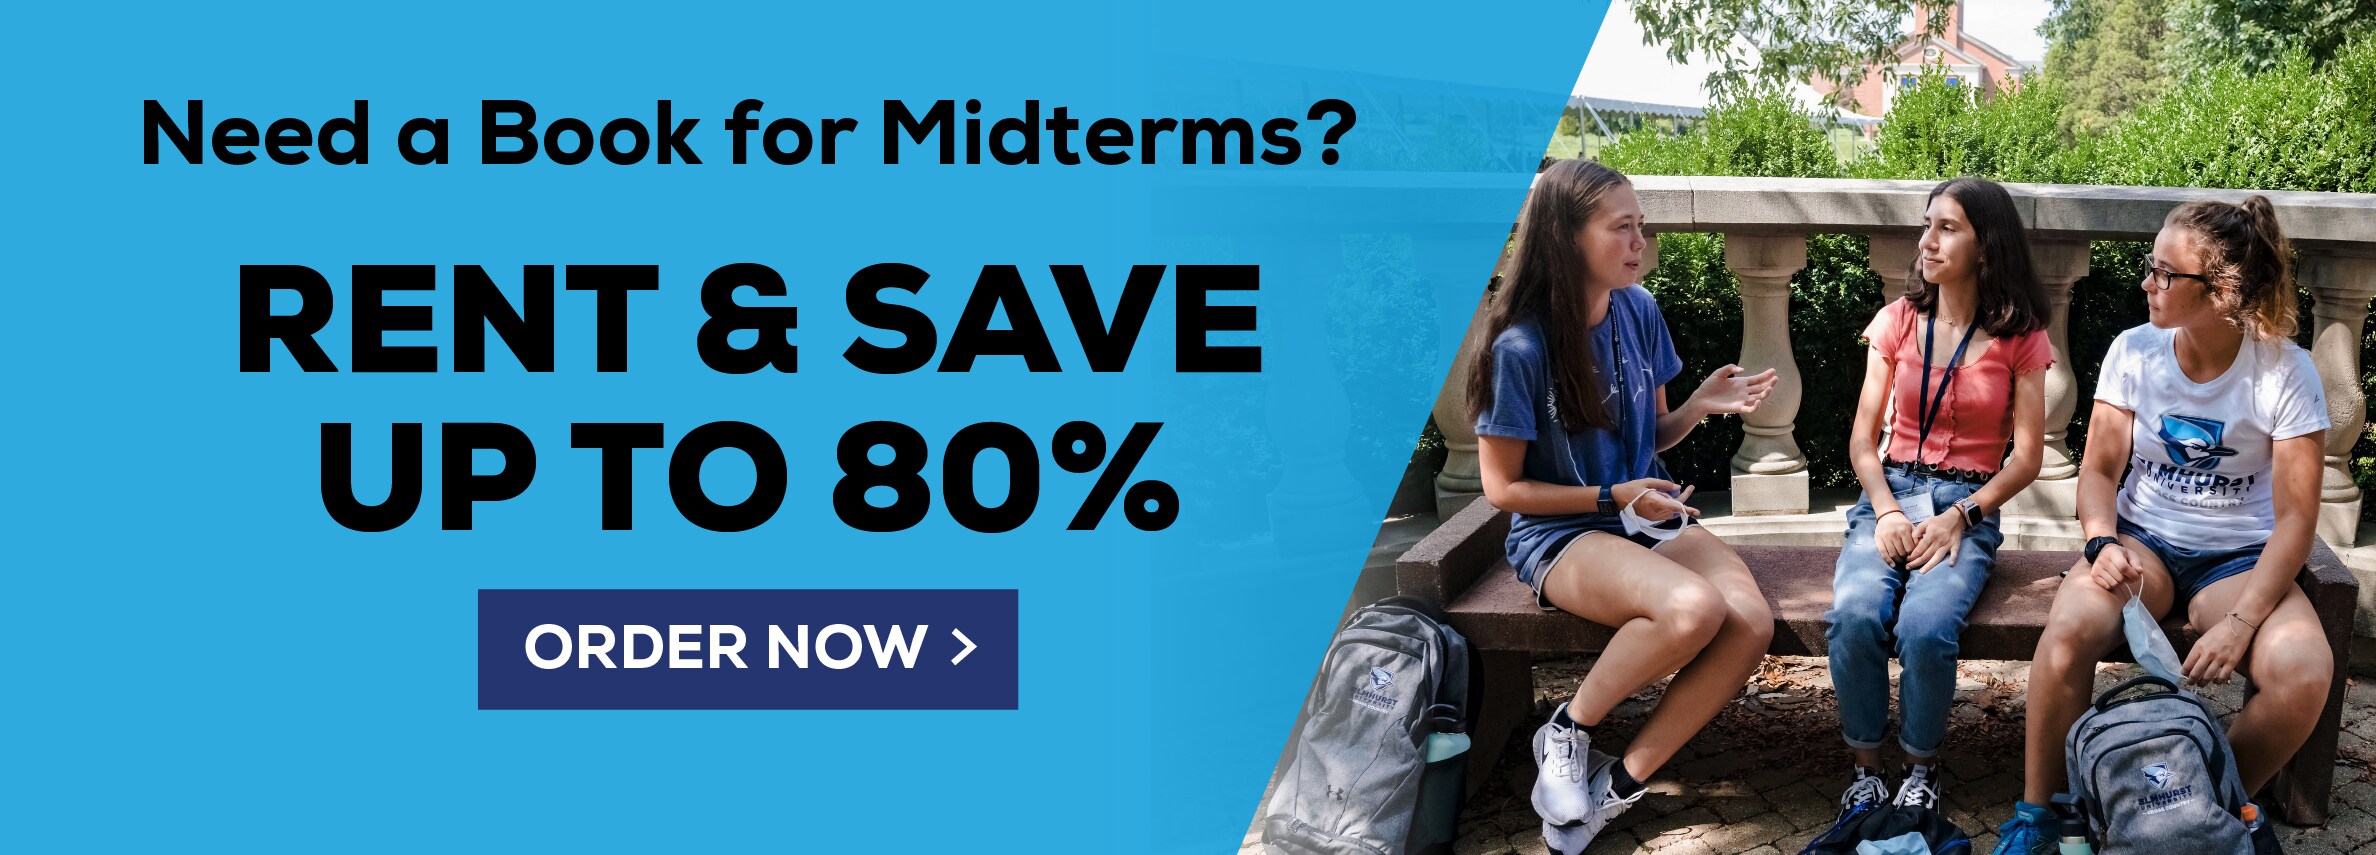 Need a Book for Midterms? RENT & SAVE UP TO 80% ORDER NOW >